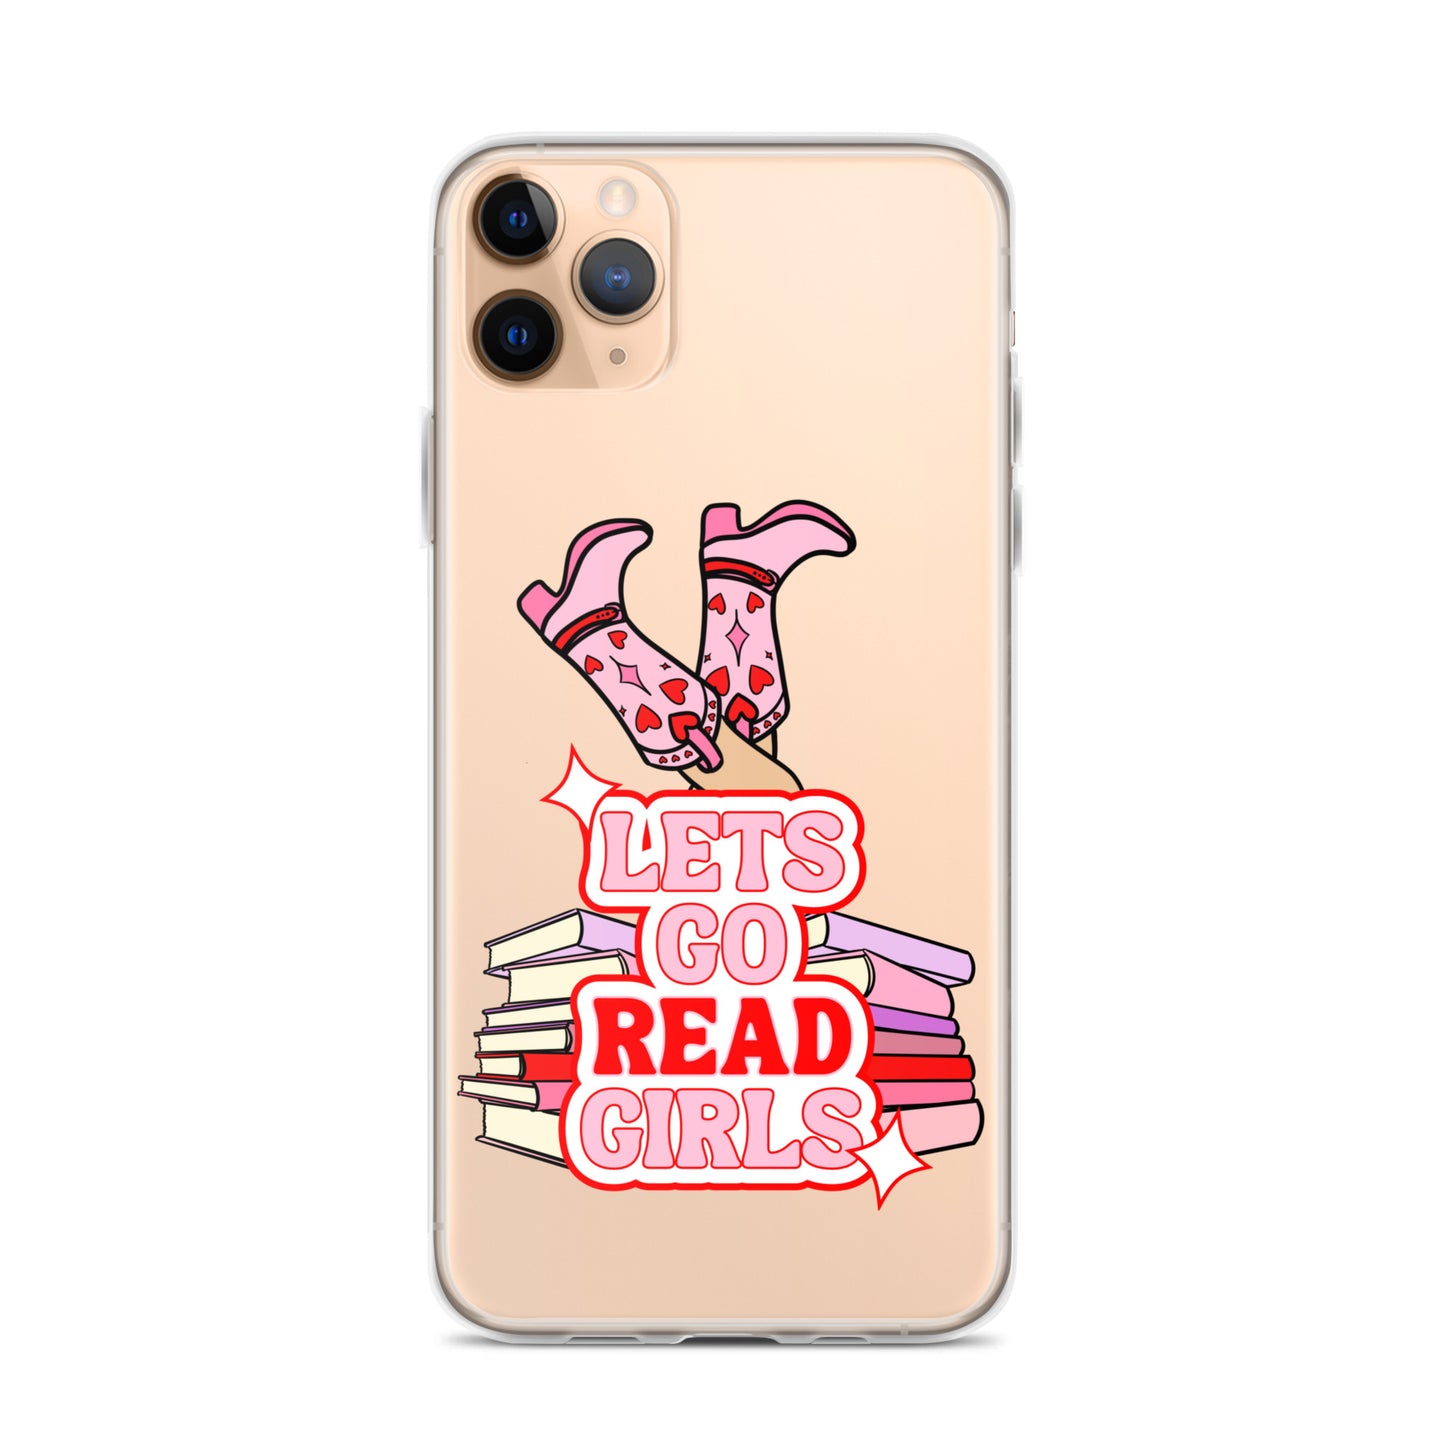 Let's Go (Read) Girls iPhone Case